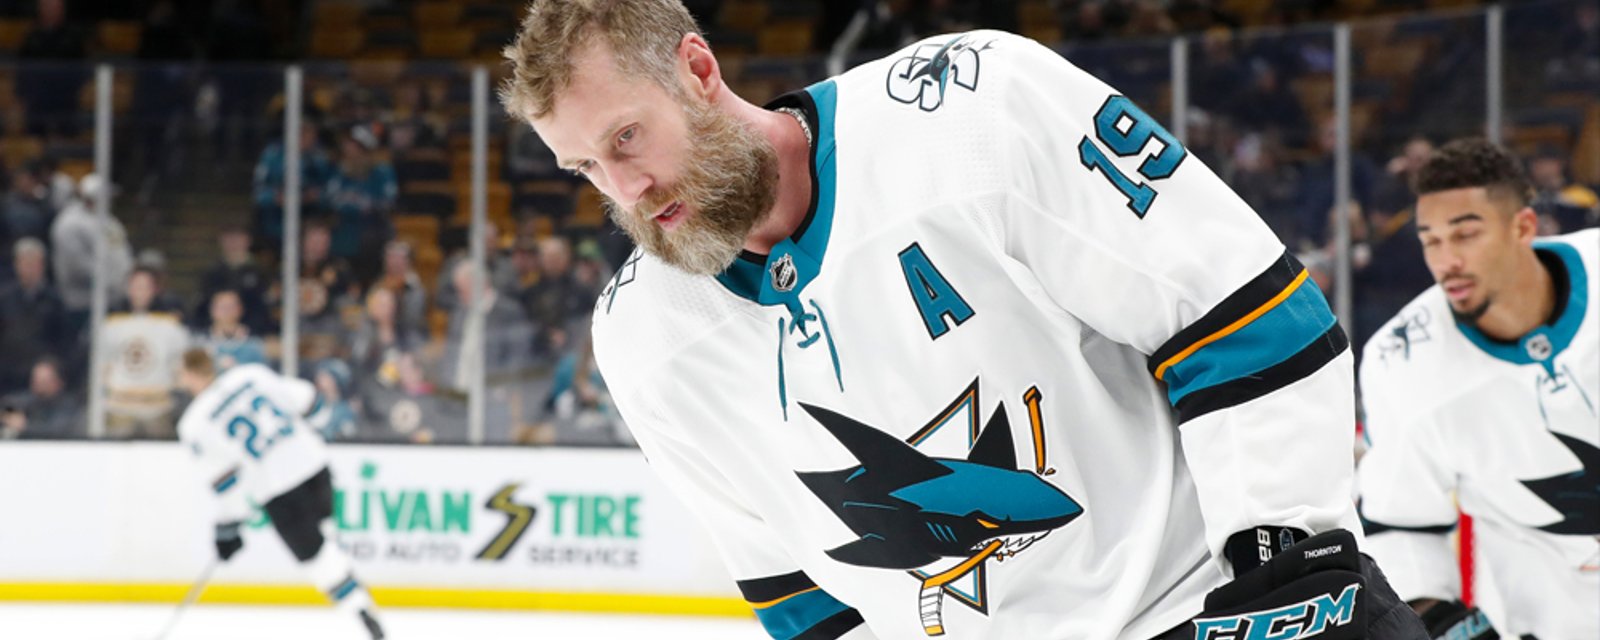 Report: Thornton wanted to be traded, Wilson wouldn’t pull the trigger